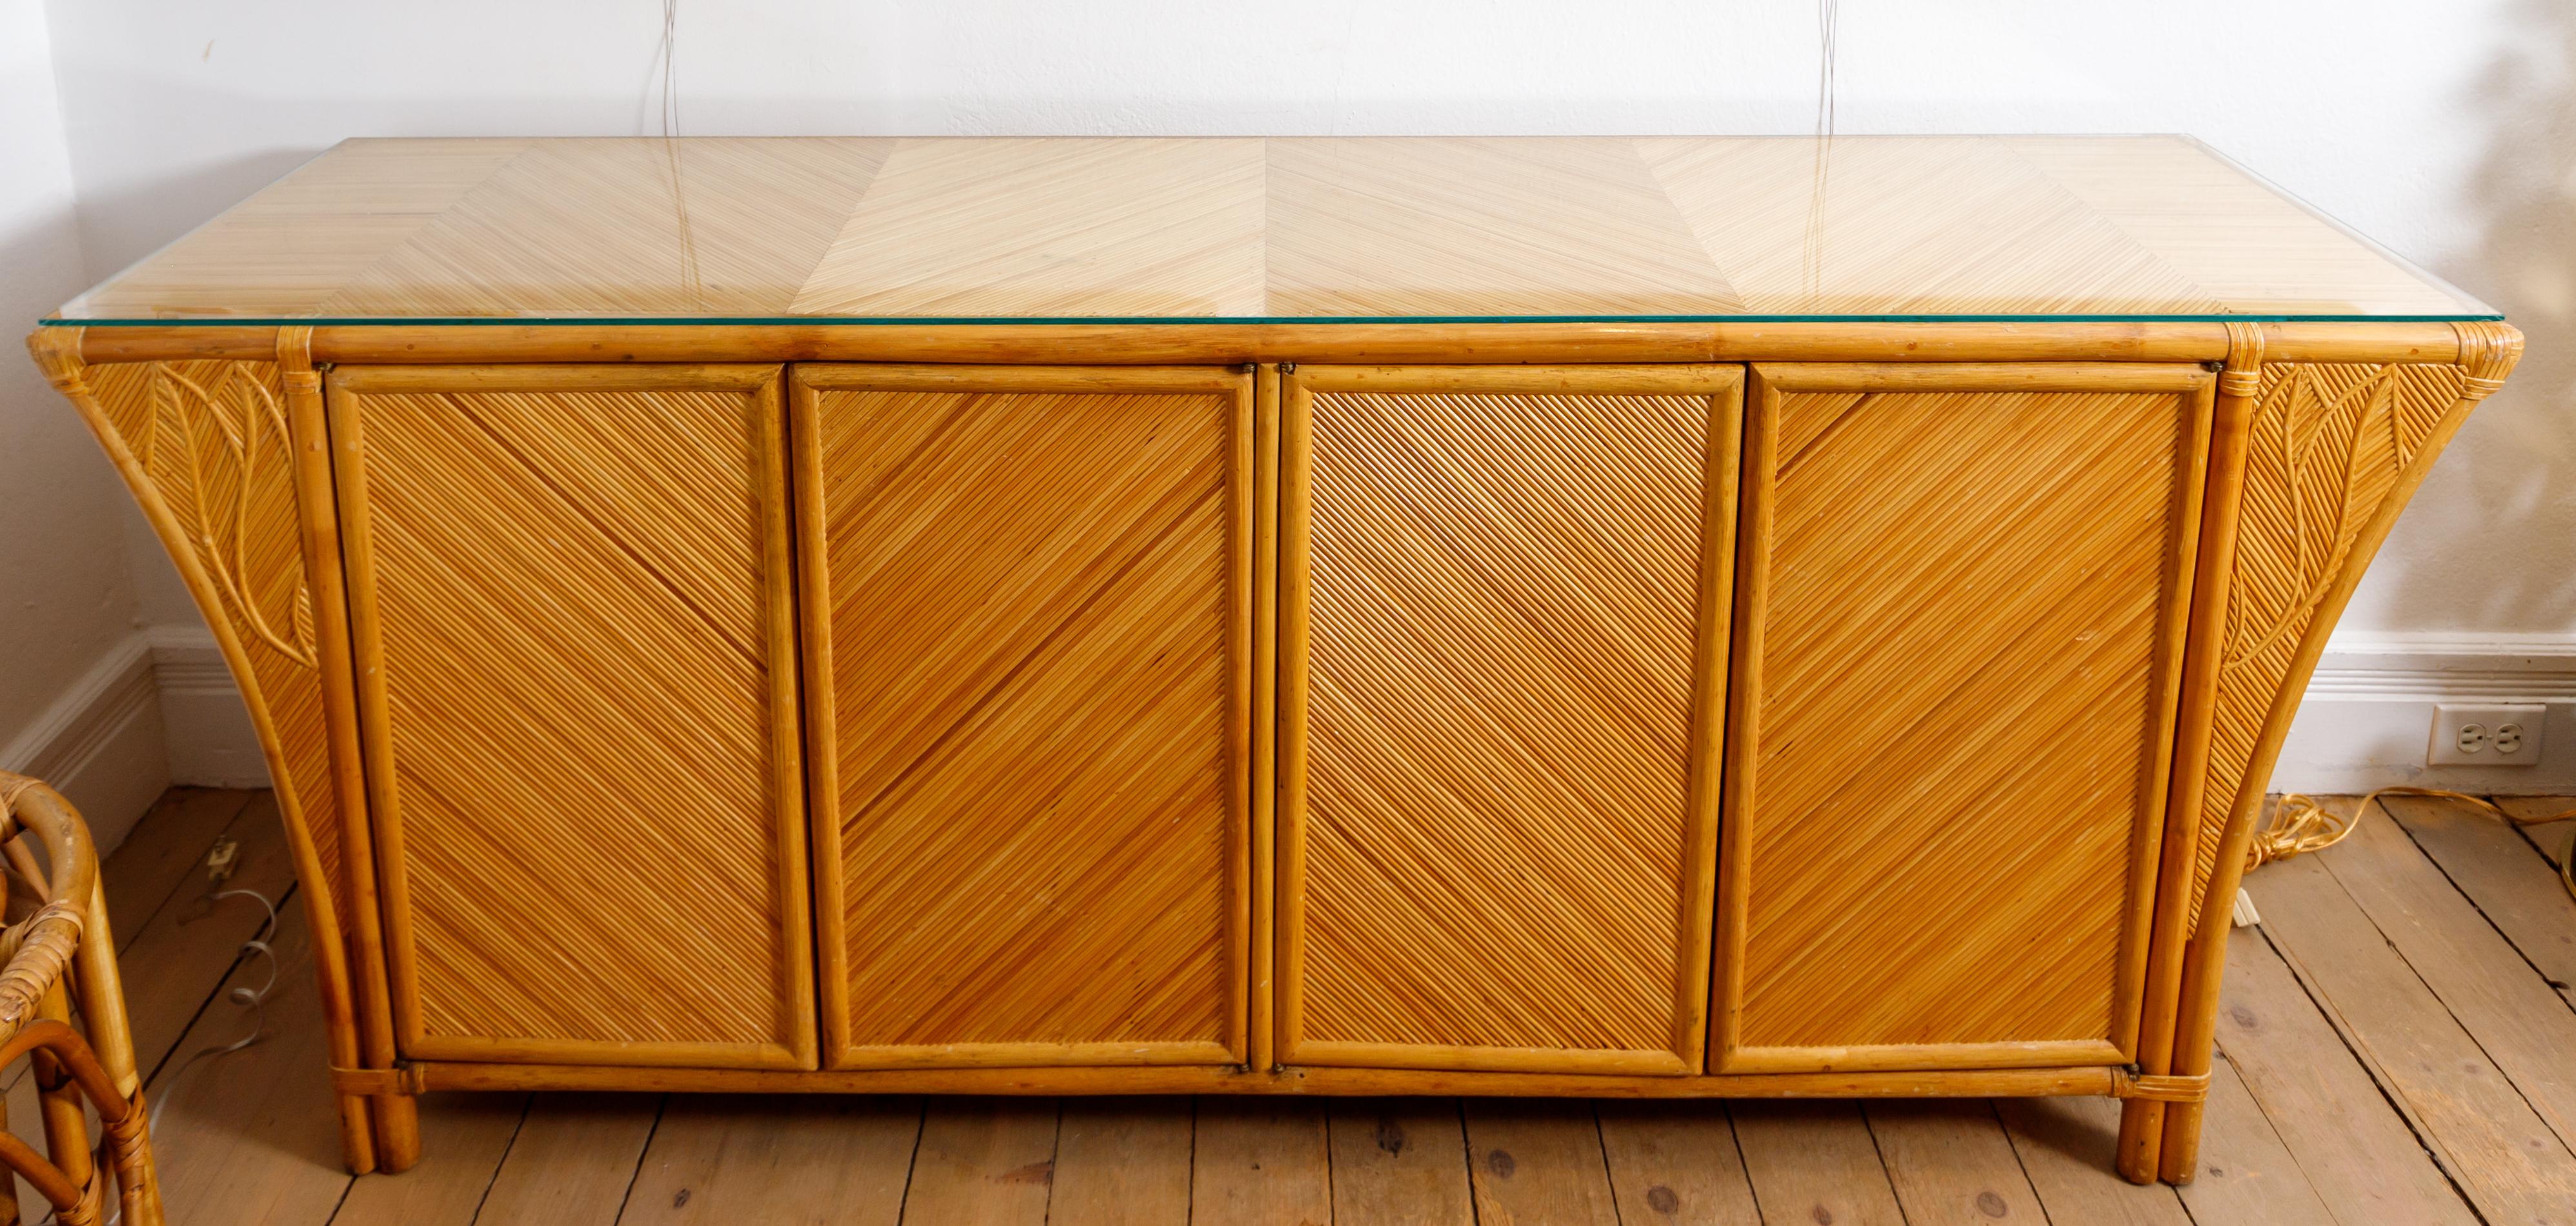 American Bamboo Credenza Featuring Four Doors, Interior Shelving and Glass Top For Sale